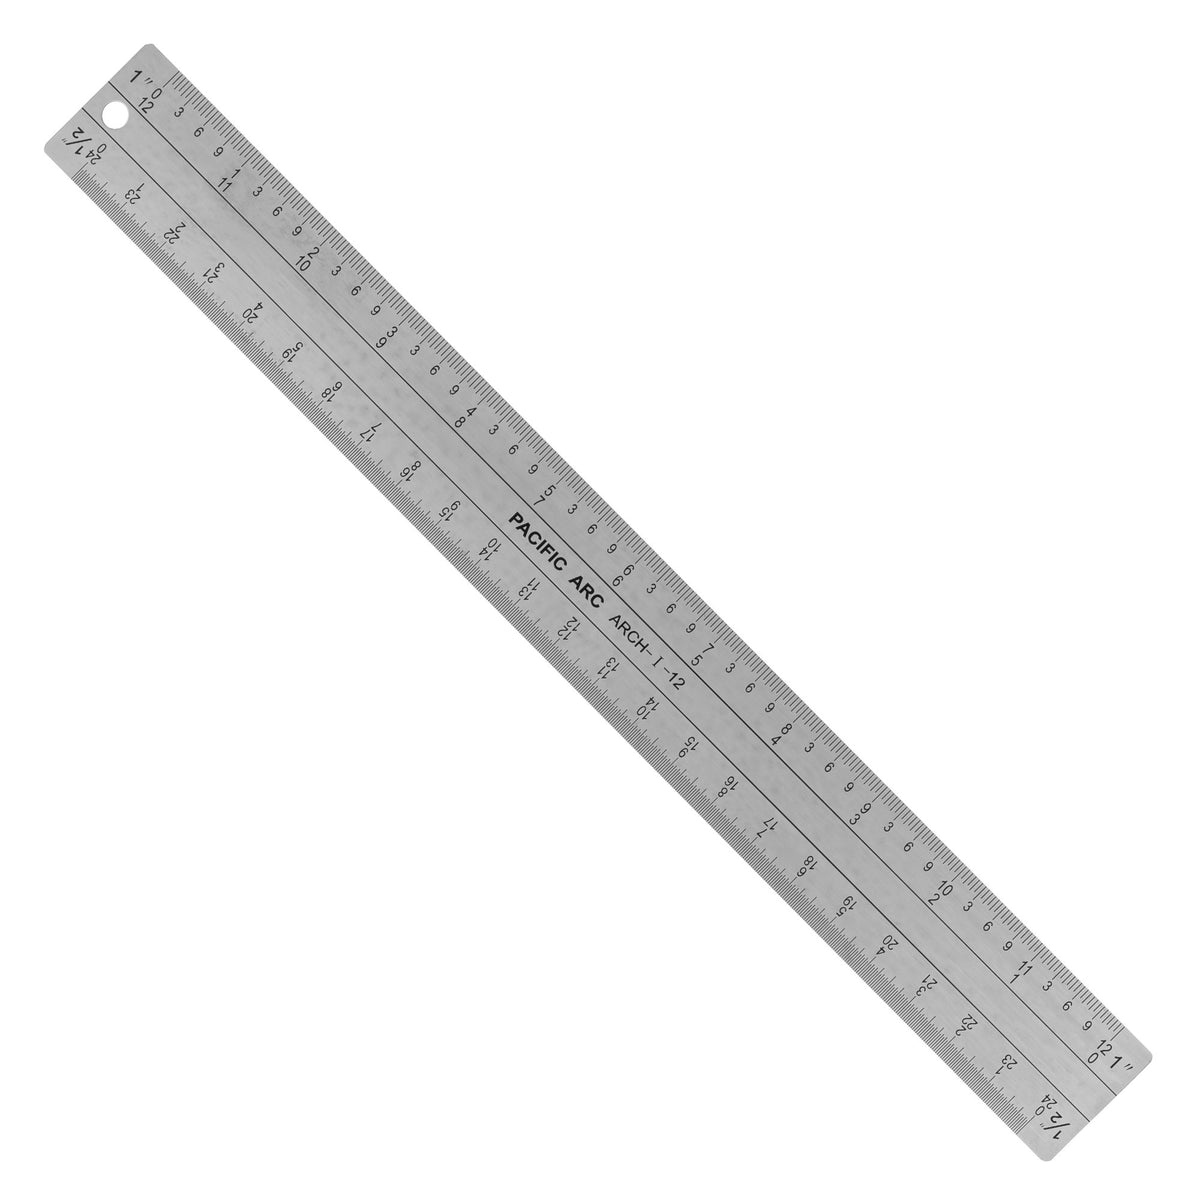 Pacific Arc Stainless Steel Rulers Inch/Metric with Conversion Table 18 in.